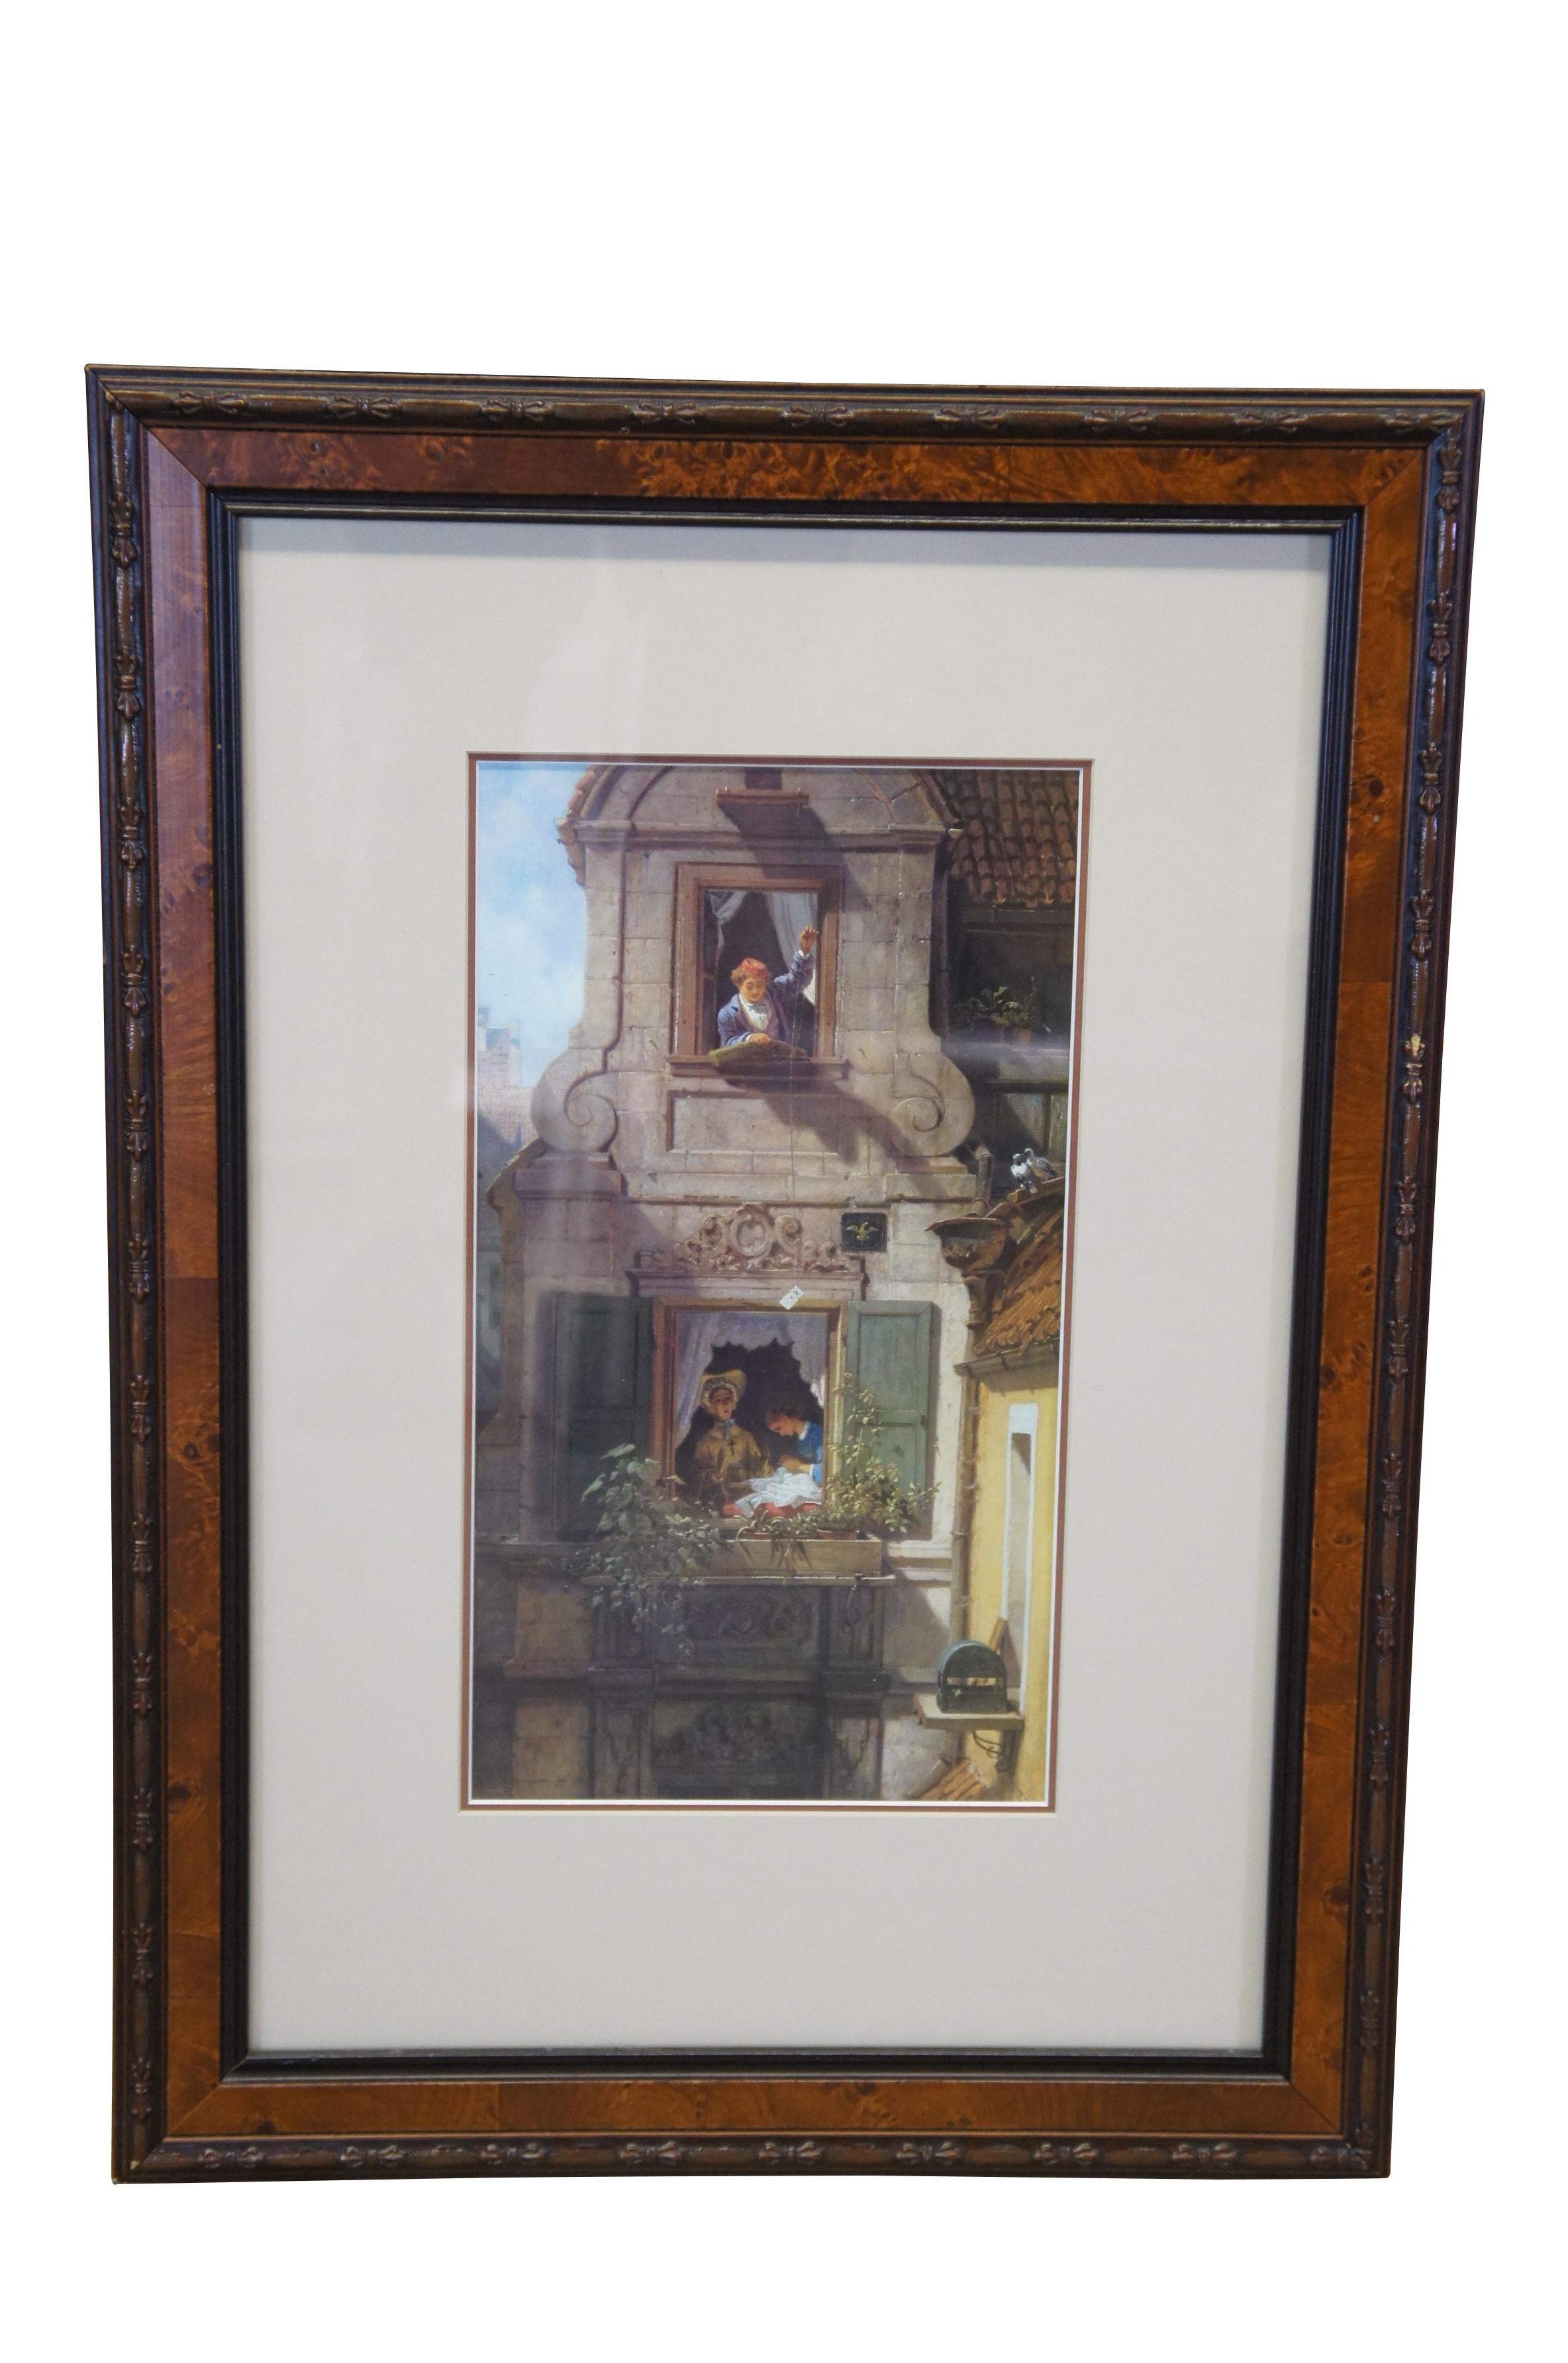 Two vintage Carl Spitzweg prints in burl frames.

The Intercepted Love letter (c.1860)
Lovers in the Forest. (c.1860)

About Carl Spitzweg
1808-1885 - German painter and draughtsman

Carl Spitzweg was one of the most important artists of the